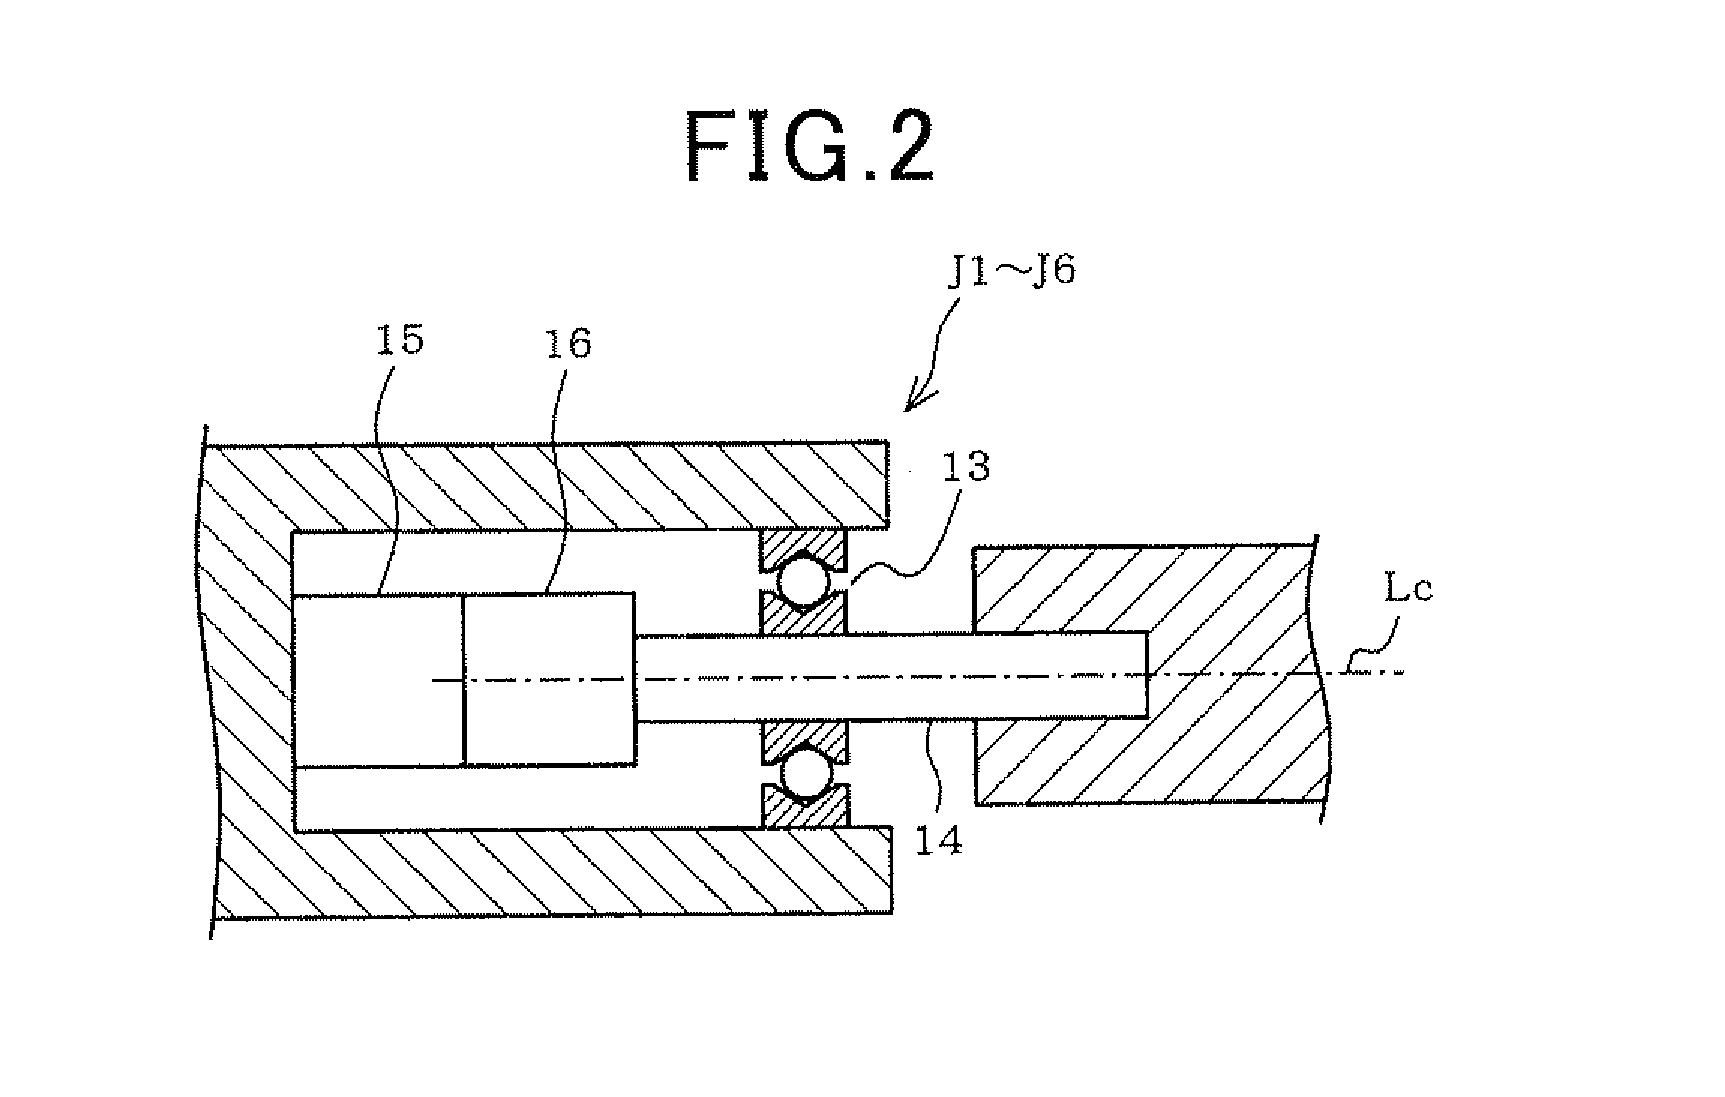 Method of detecting an inter-axis offset of 6-axis robot